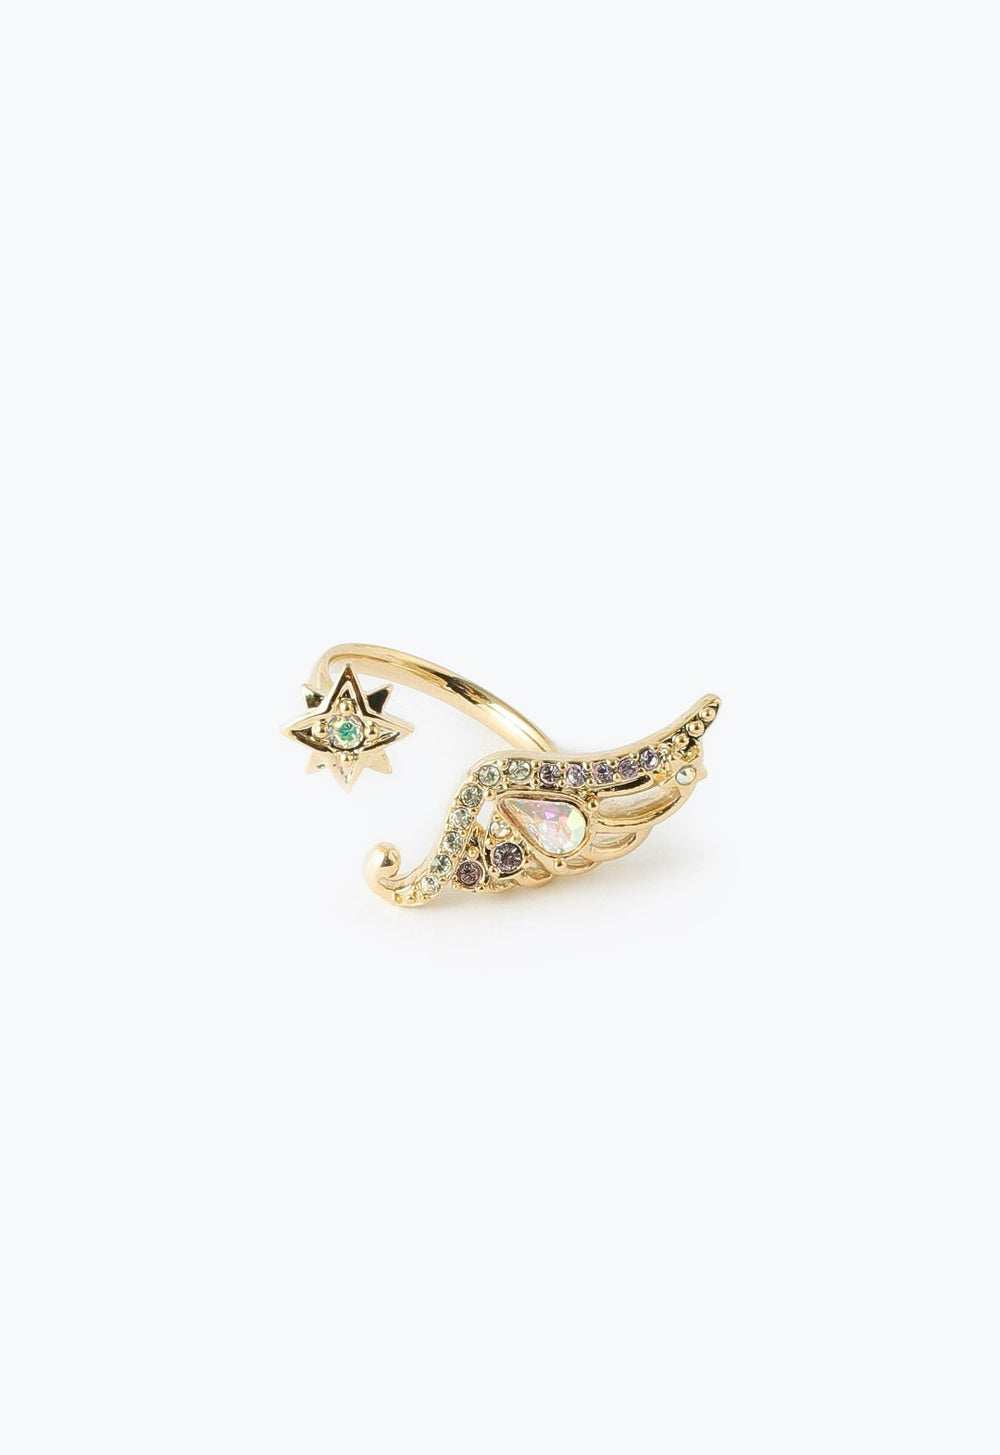 Butterfly wing ring gold, edged with small gemstones, large gem center, open ring ends with a star